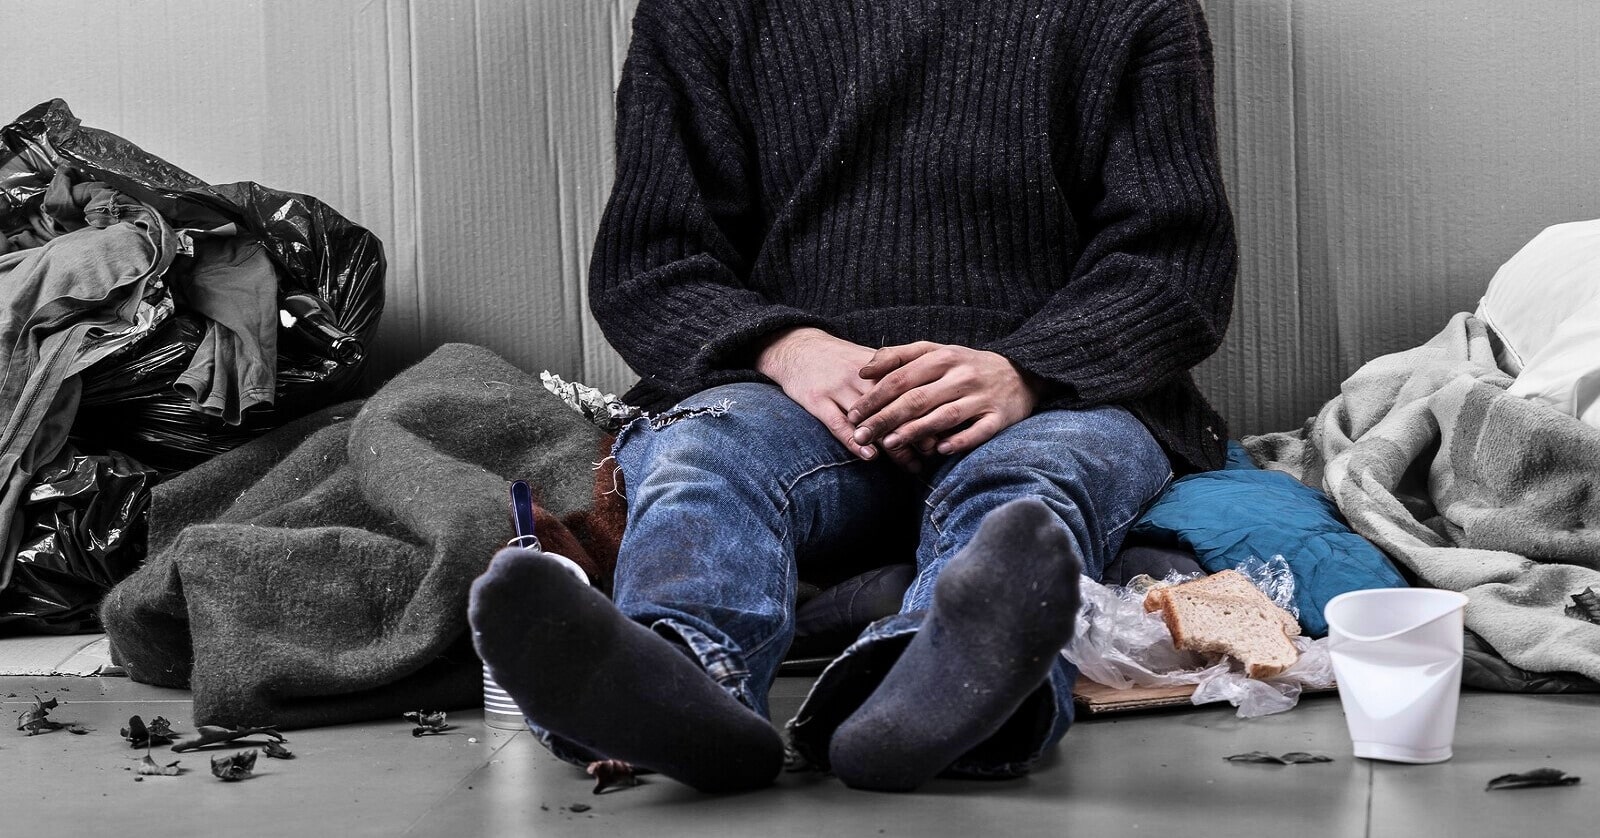 homeless person from the neck down sitting on the floor surrounded by his possessions